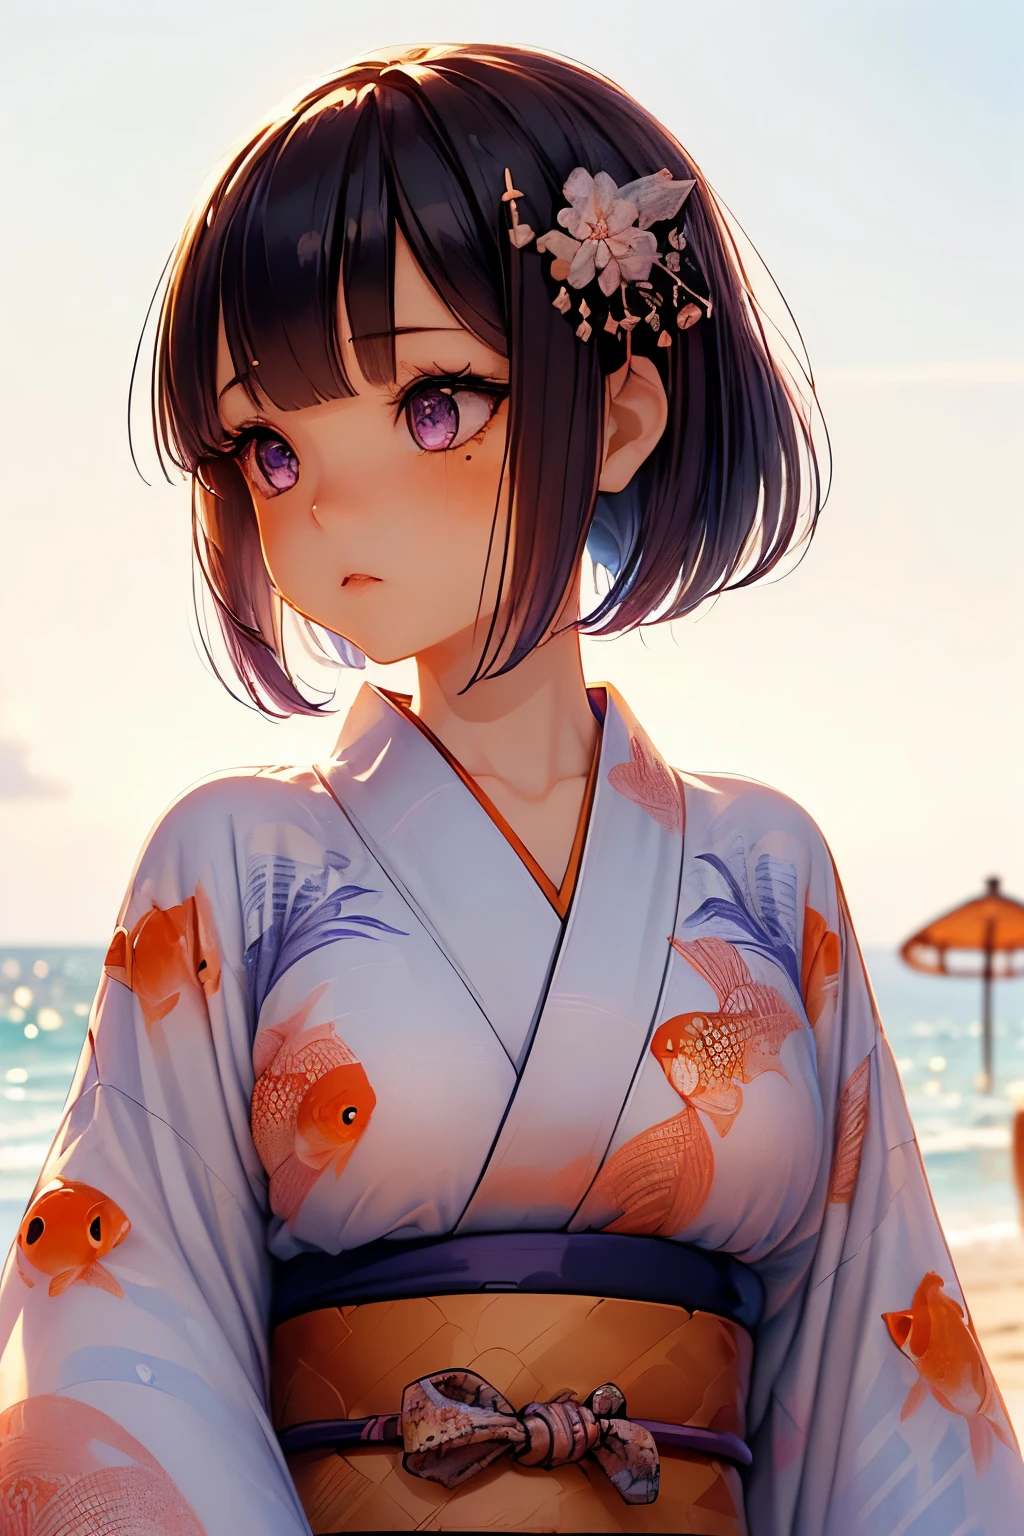 (ultra-detailed face, looking away:1.3), (She is walking on the beach wearing a Japanese yukata with a goldfish pattern.:1.3), (Fantasy Illustration with Gothic & Ukiyo-e & Comic Art.), (A middle-aged dark elf woman with white hair, blunt bangs, bob cut, and dark purple skin.), (Her eyes are lavender in color.)